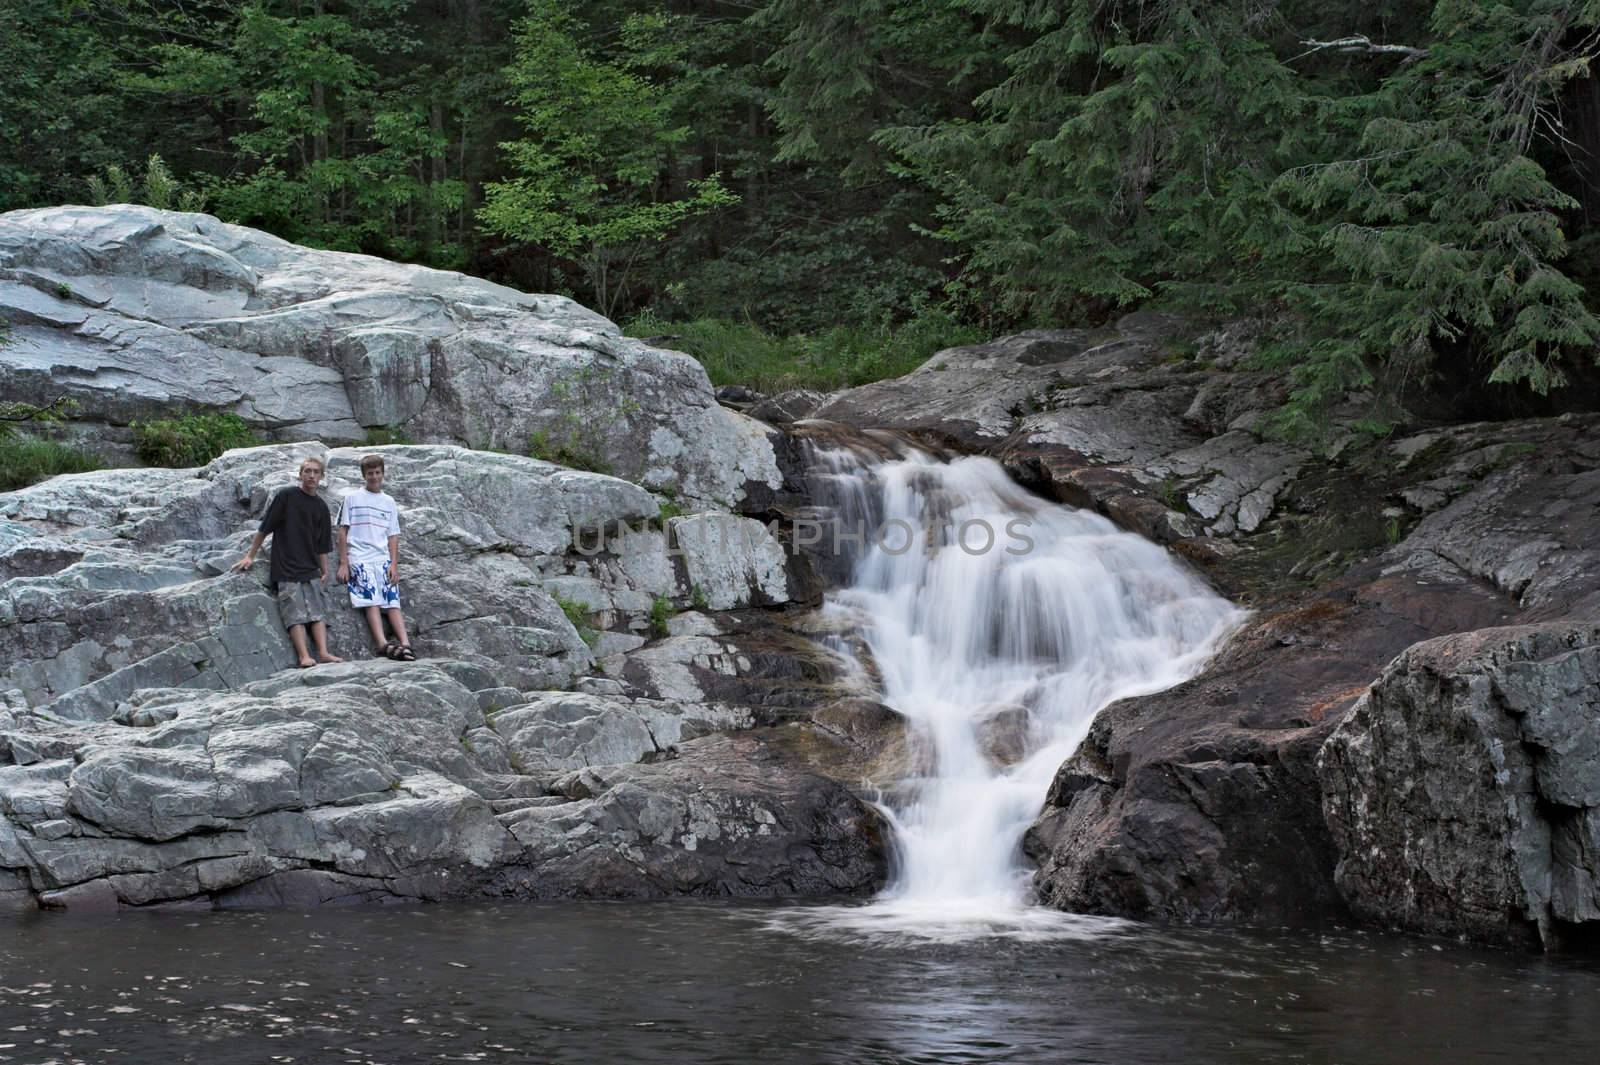 Buttermilk Falls and Kids by sbonk